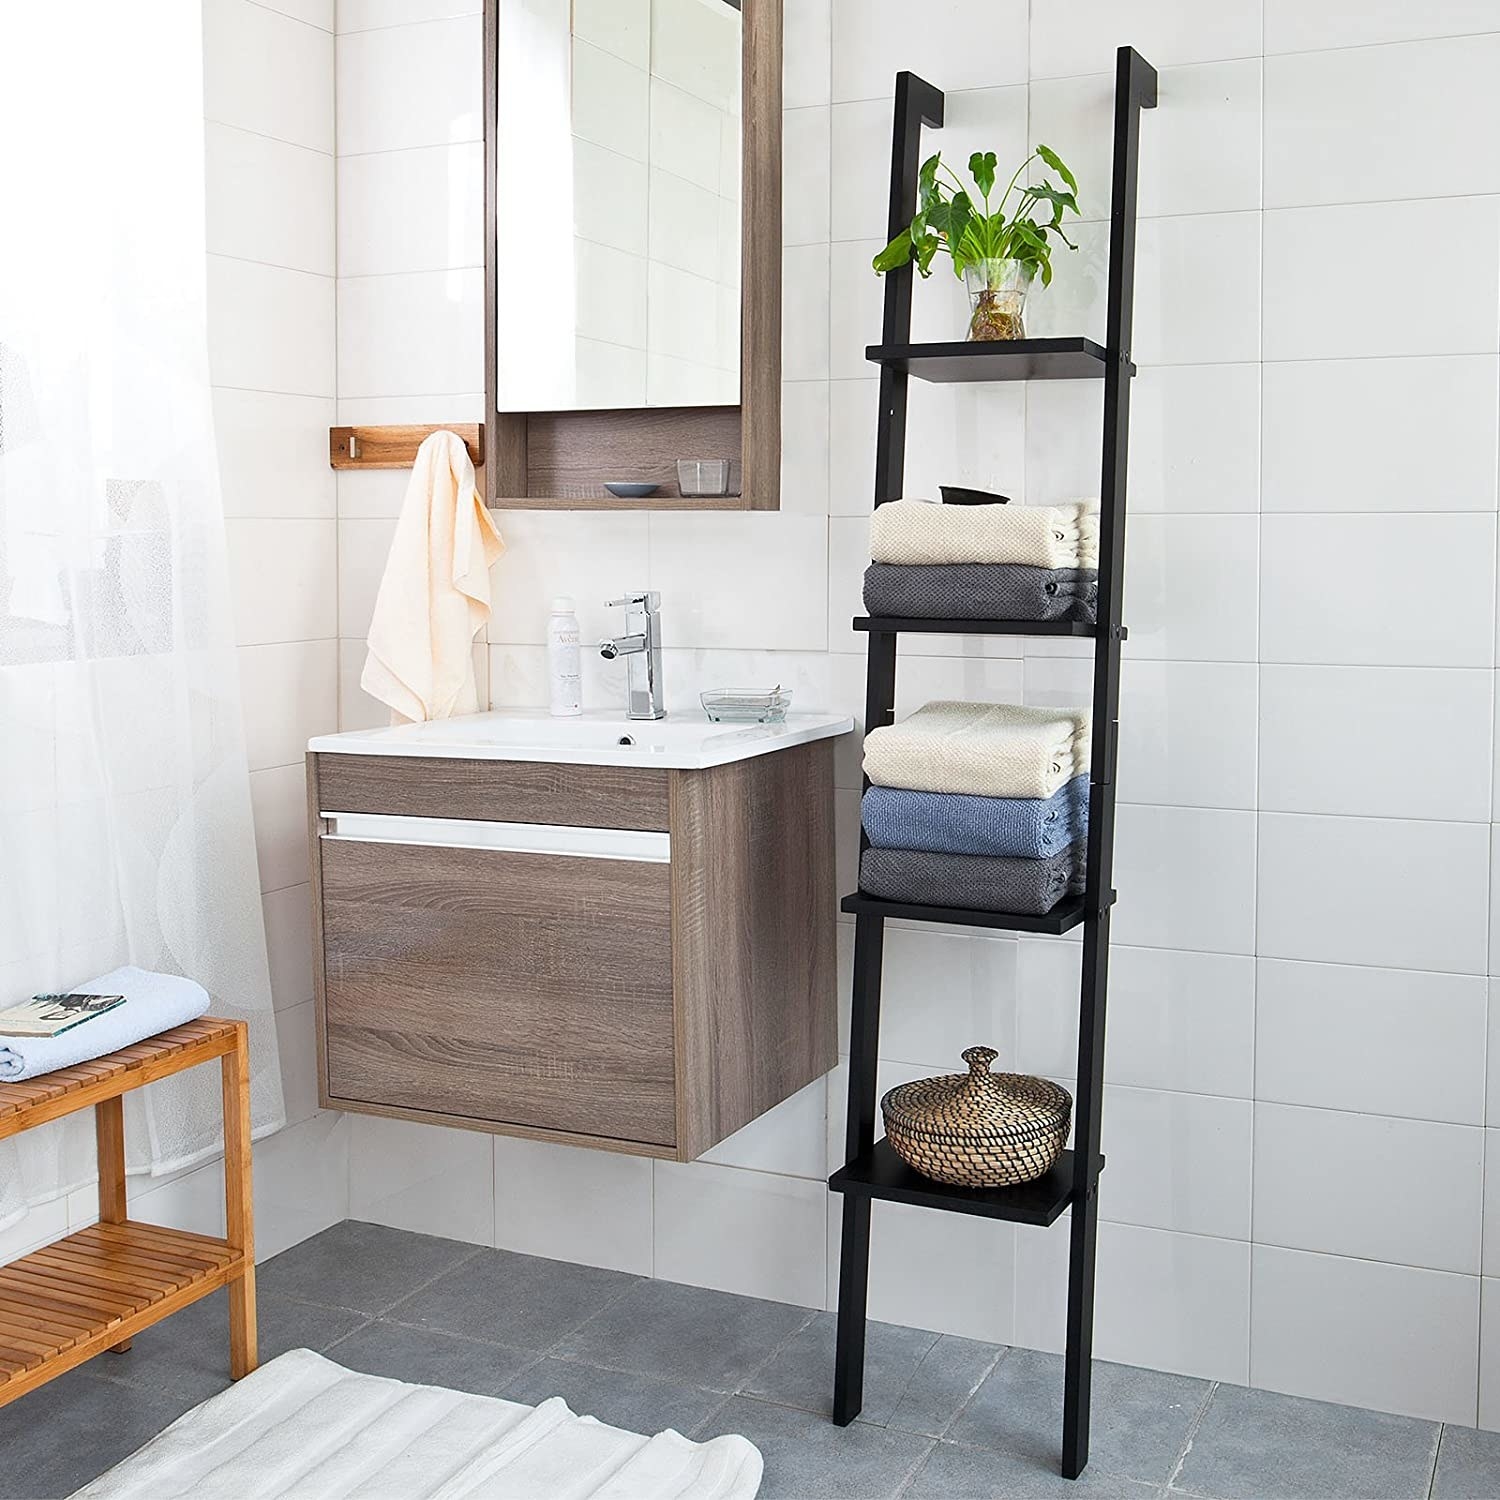 The ladder shelf in a bathroom with towels and decor on it